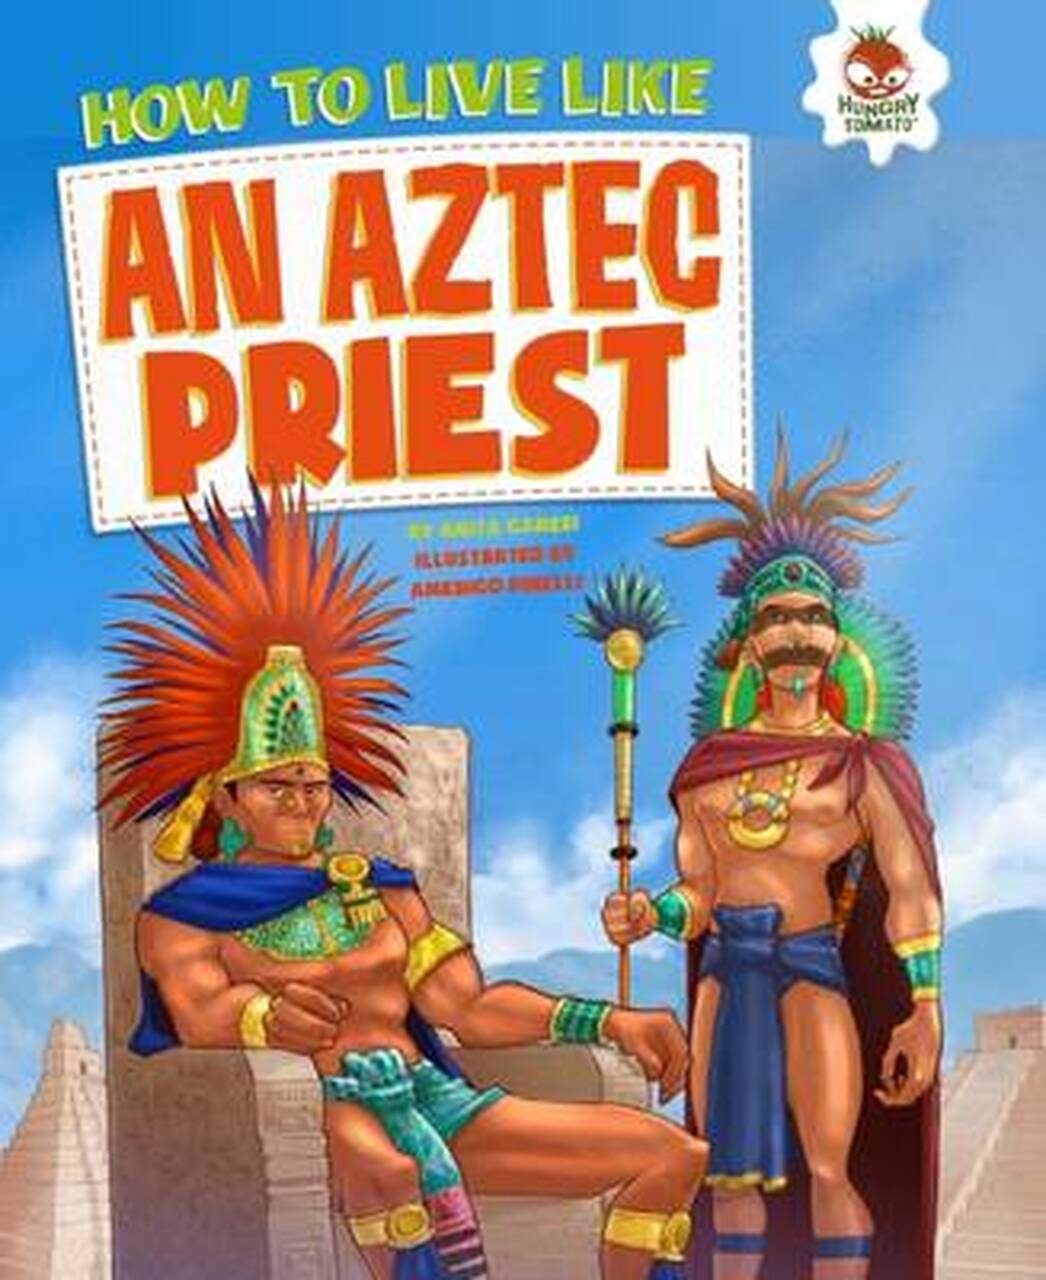 Sách tiếng Anh - How To Live Like Aztec Priest